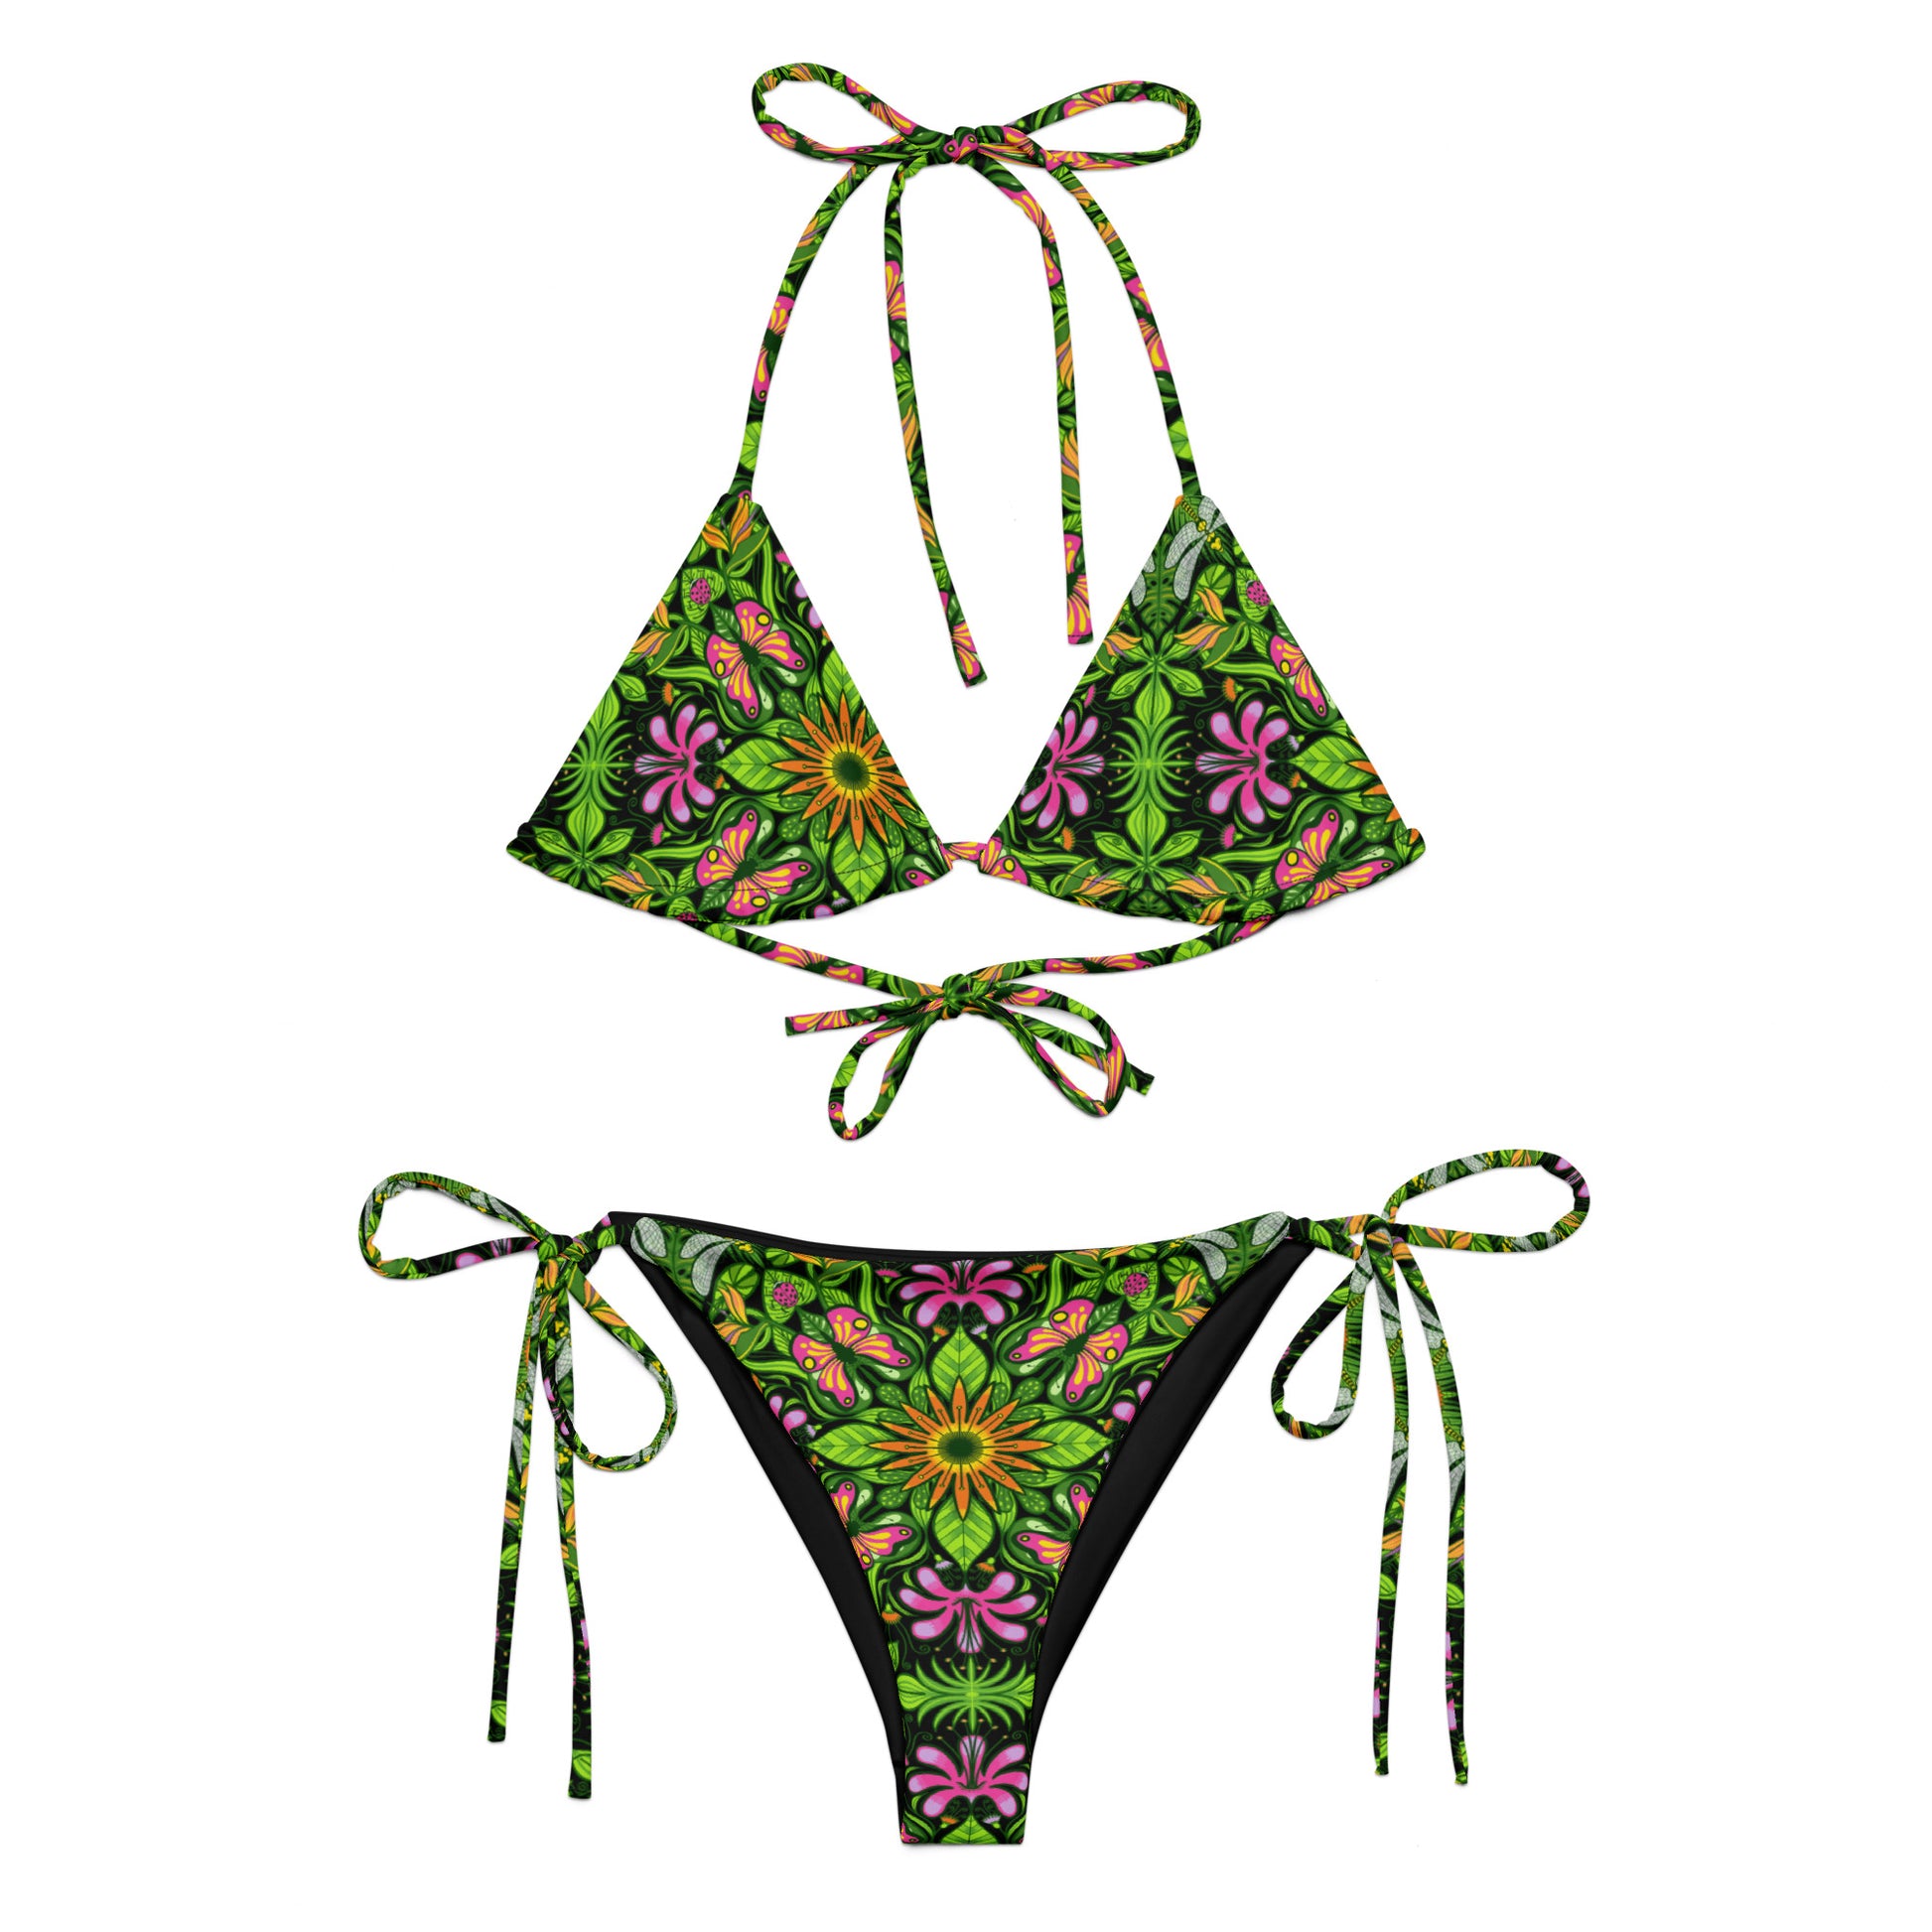 Magical garden full of flowers and insects All-over print recycled string bikini. Product overview